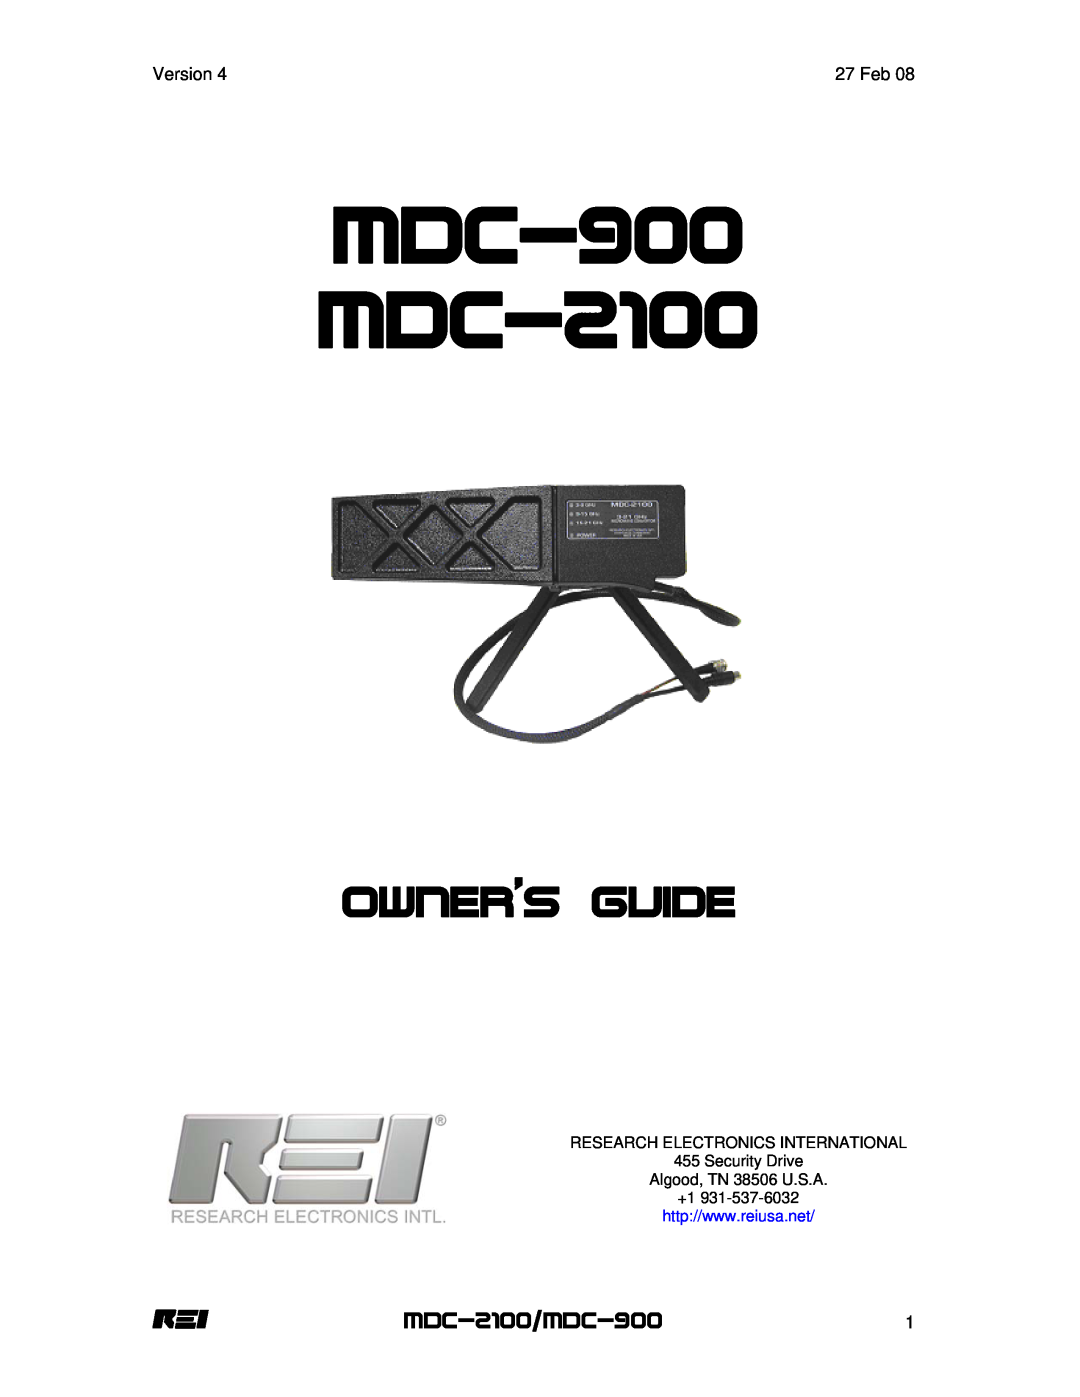 REI manual MDC-2100/MDC-900, MDC-900 MDC-2100, Owner’S Guide, RESEARCH ELECTRONICS INTERNATIONAL 455 Security Drive 